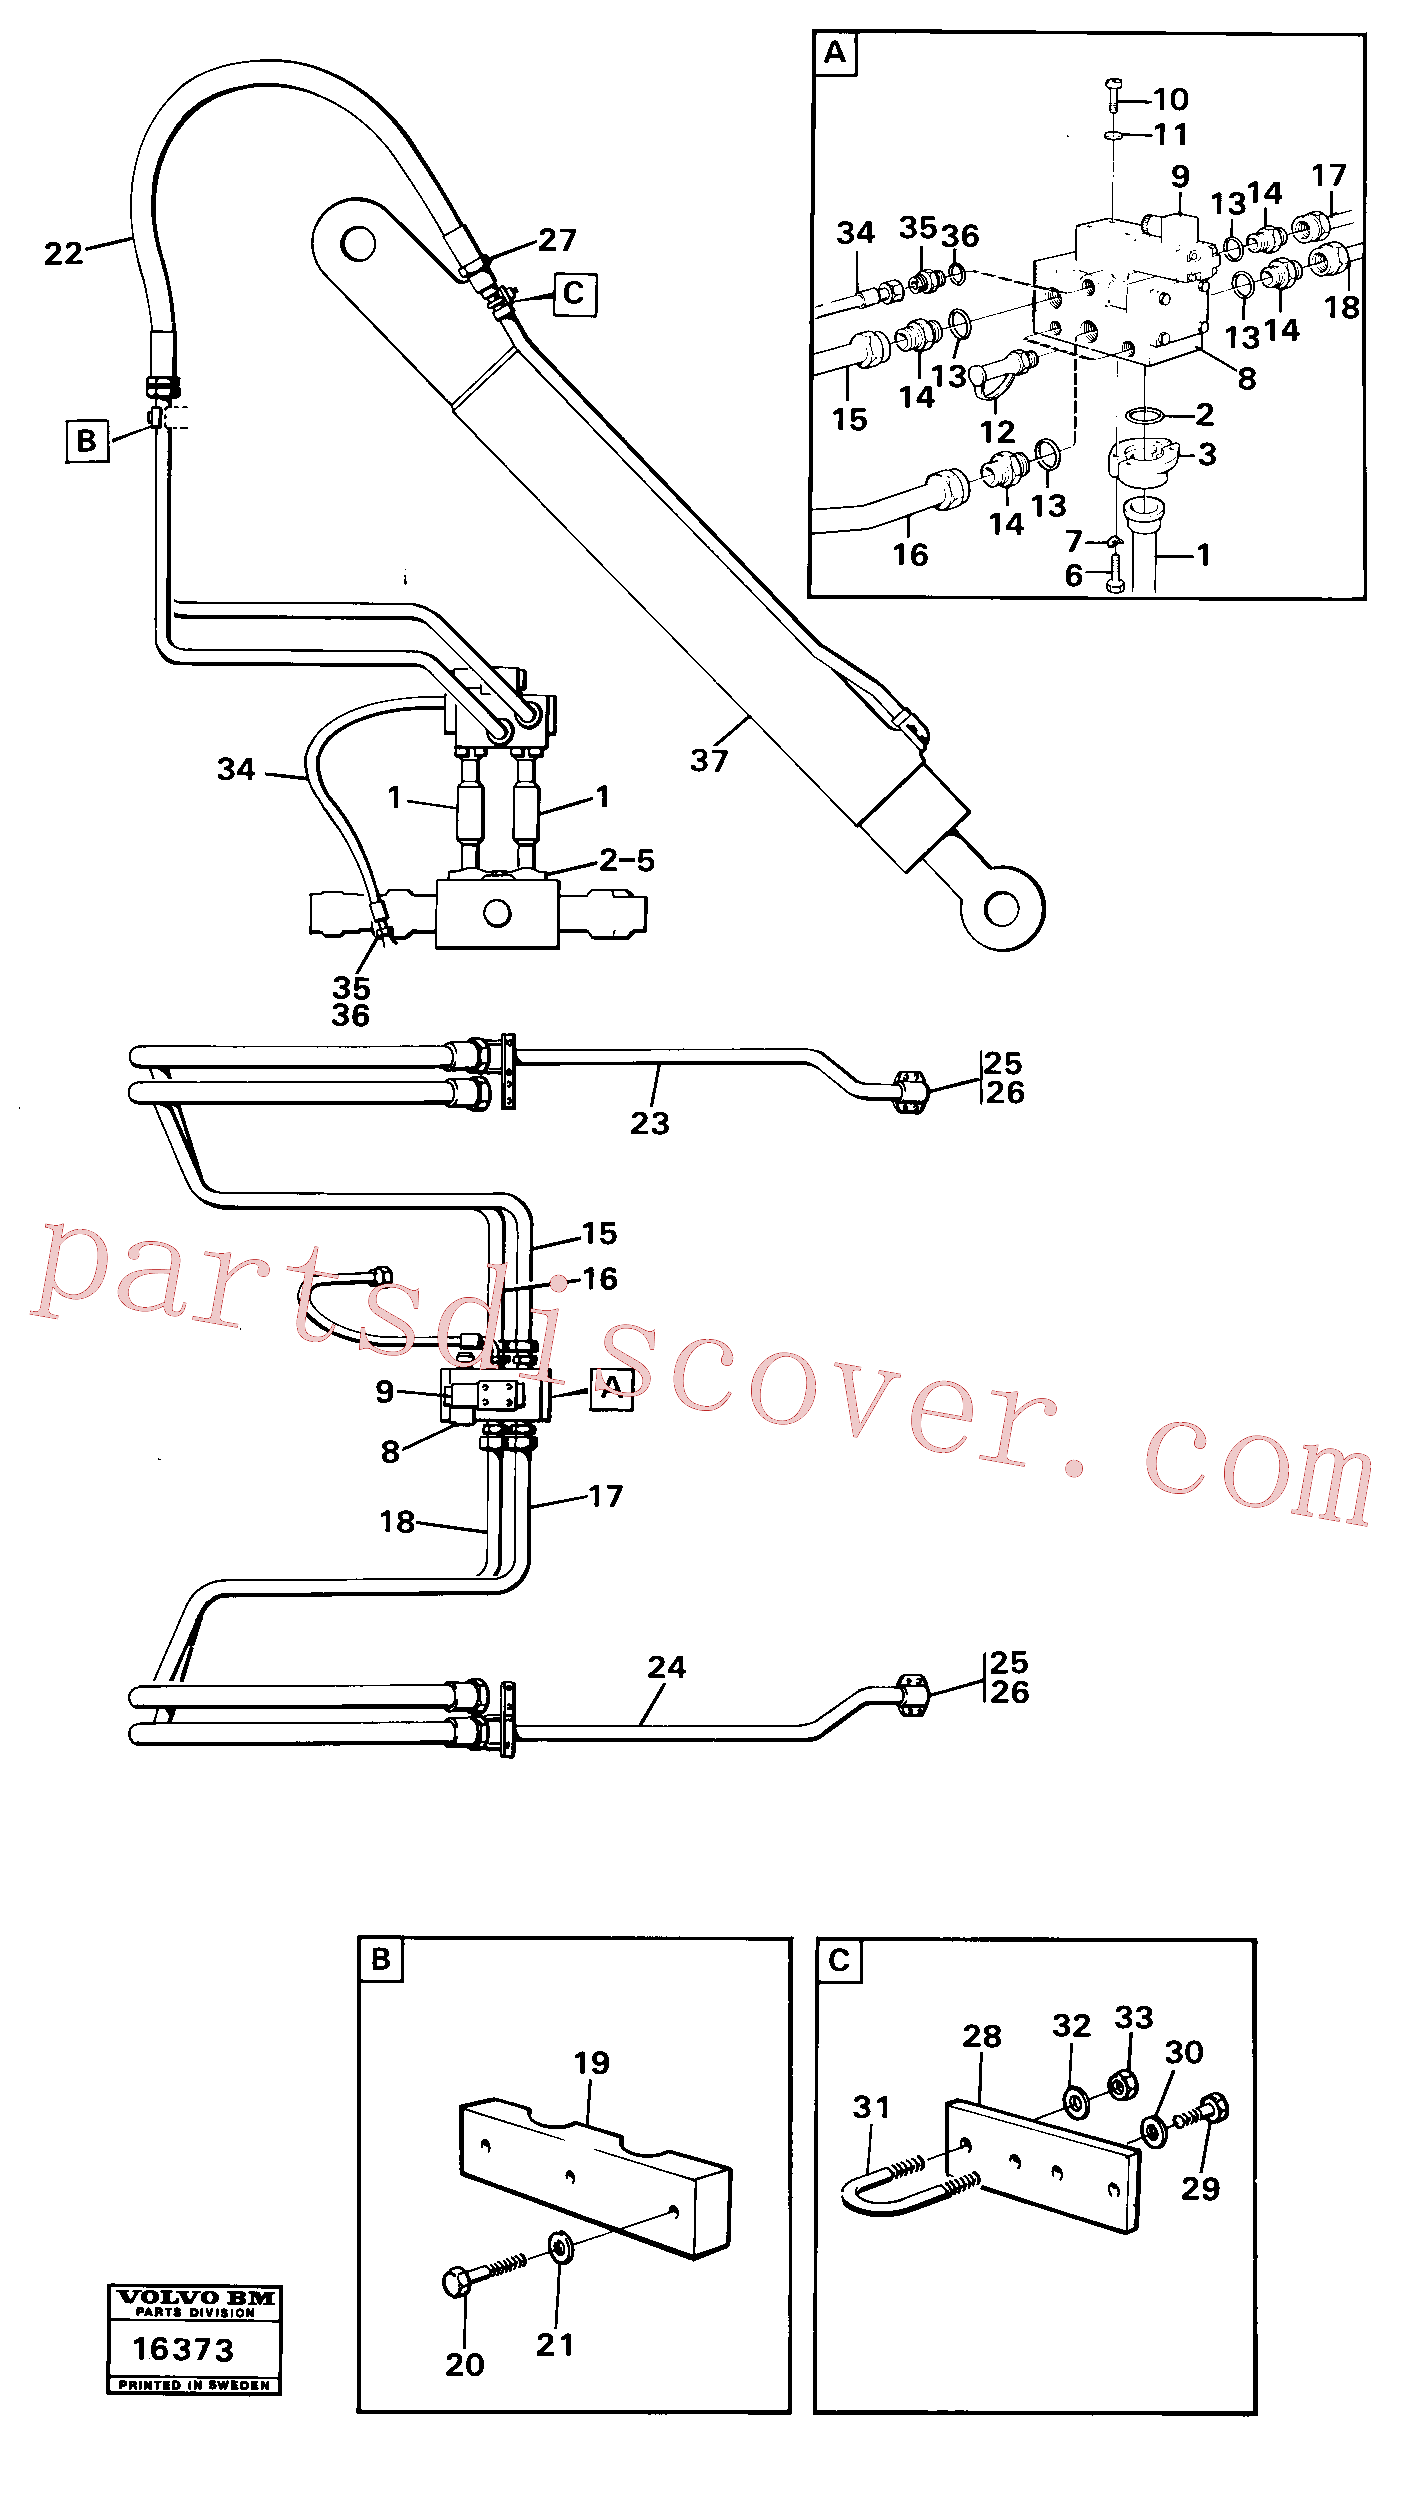 VOE4850621 for Volvo Tilting system(16373 assembly)